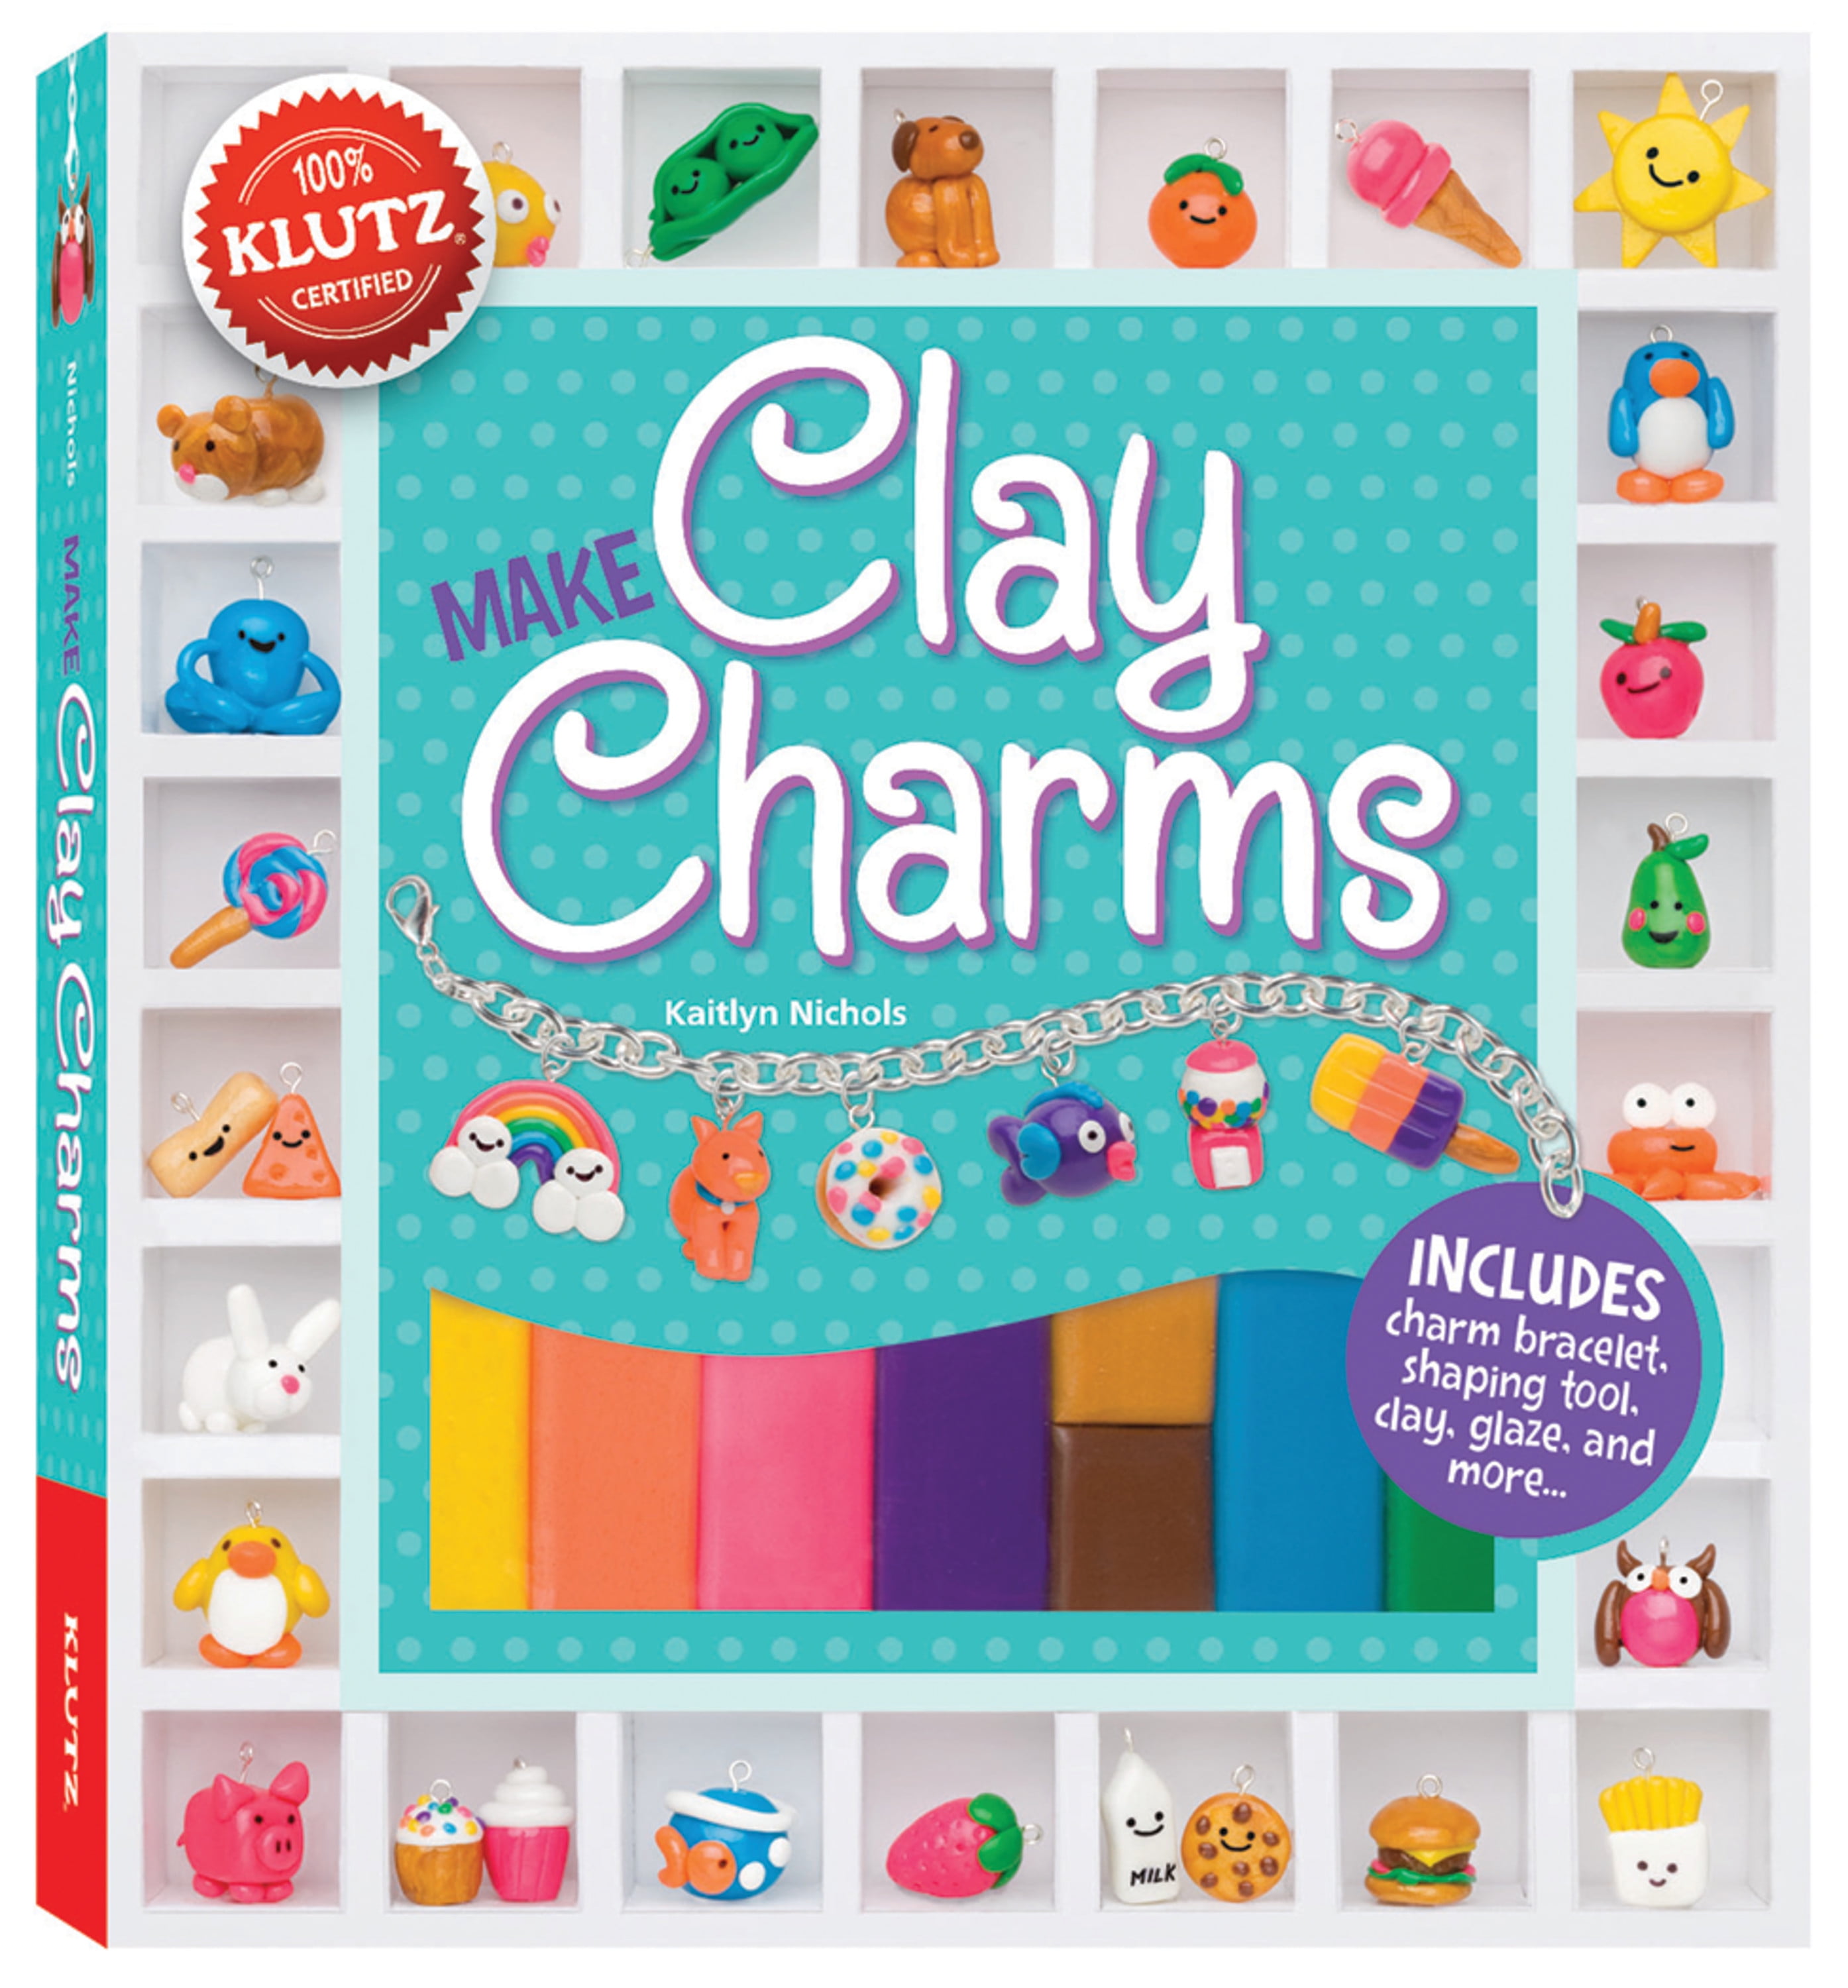 Cra-Z-Art Be Inspired New BFF Charm Jewelry Multicolor Craft Kit, Unisex Child Ages 8 and Up